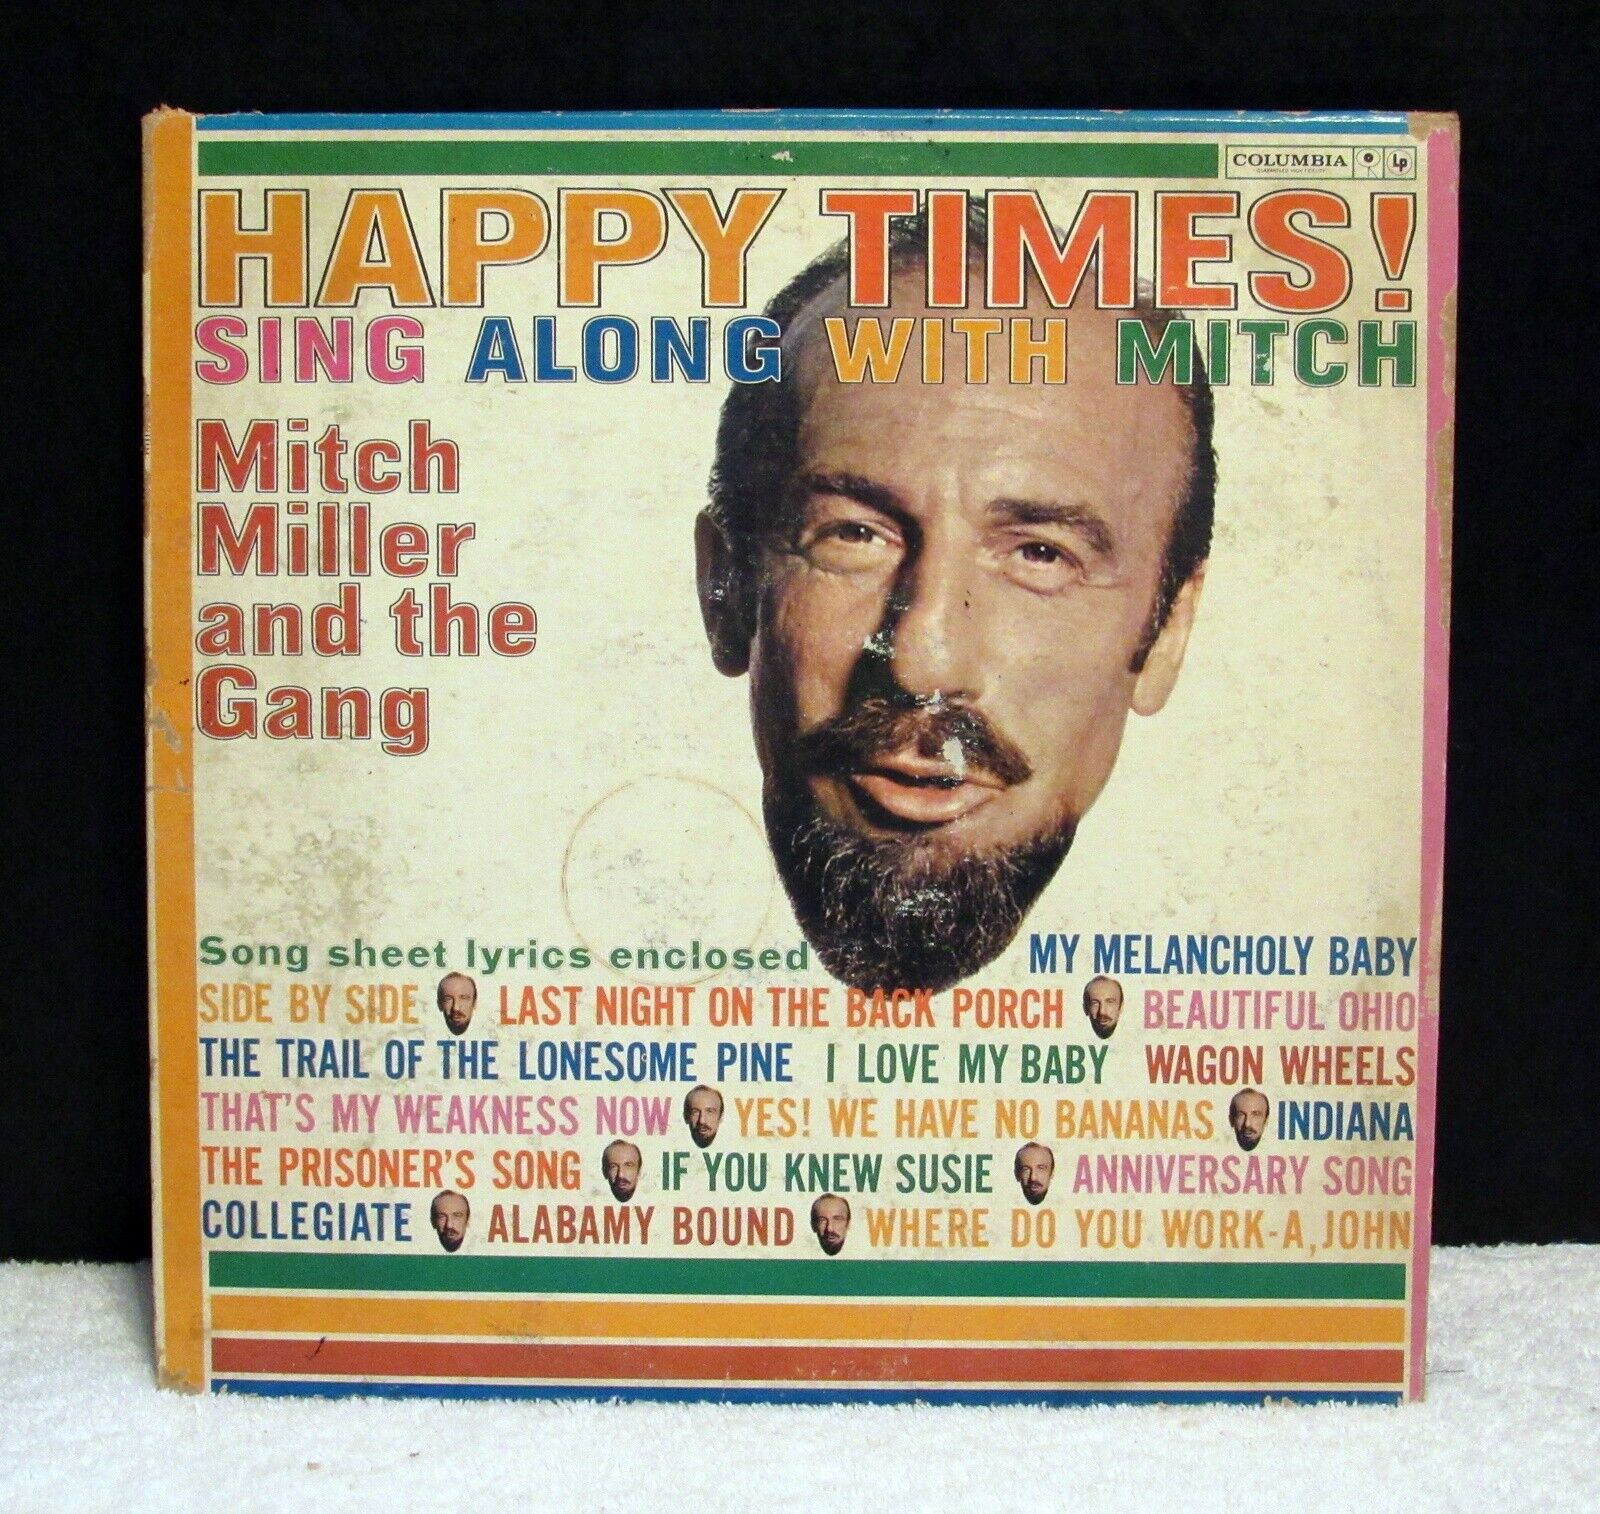 Vintage Happy Times With Mitch Miller 33 1/3 LP Record  